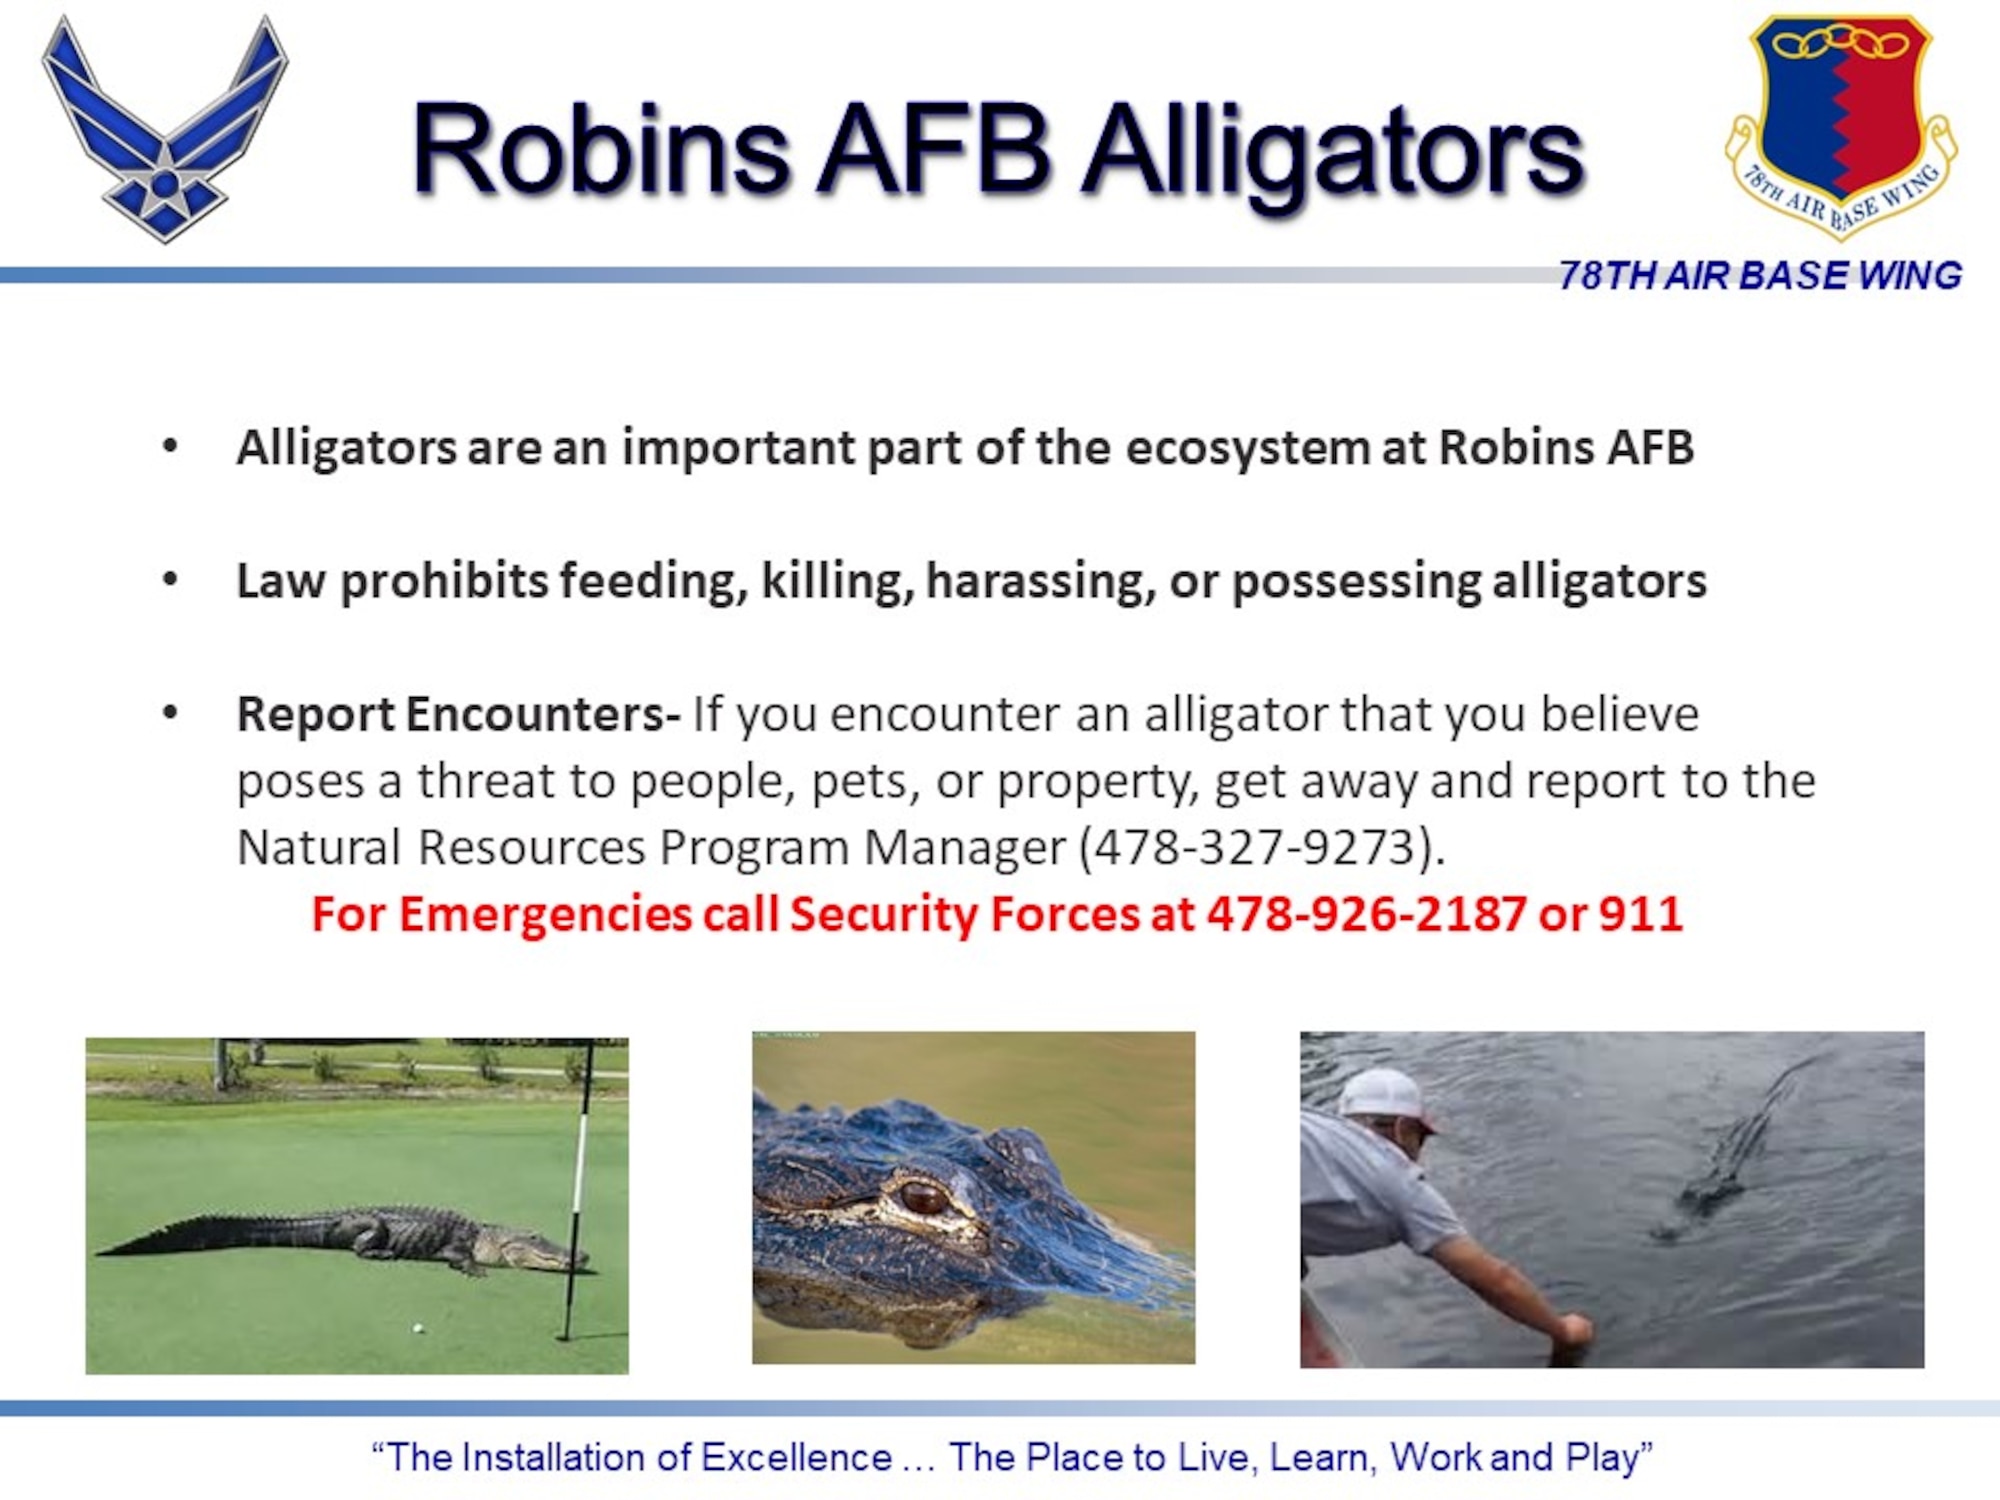 Graphic shows photos of alligators and says to call Security Forces in an emergency at 478-926-2187.